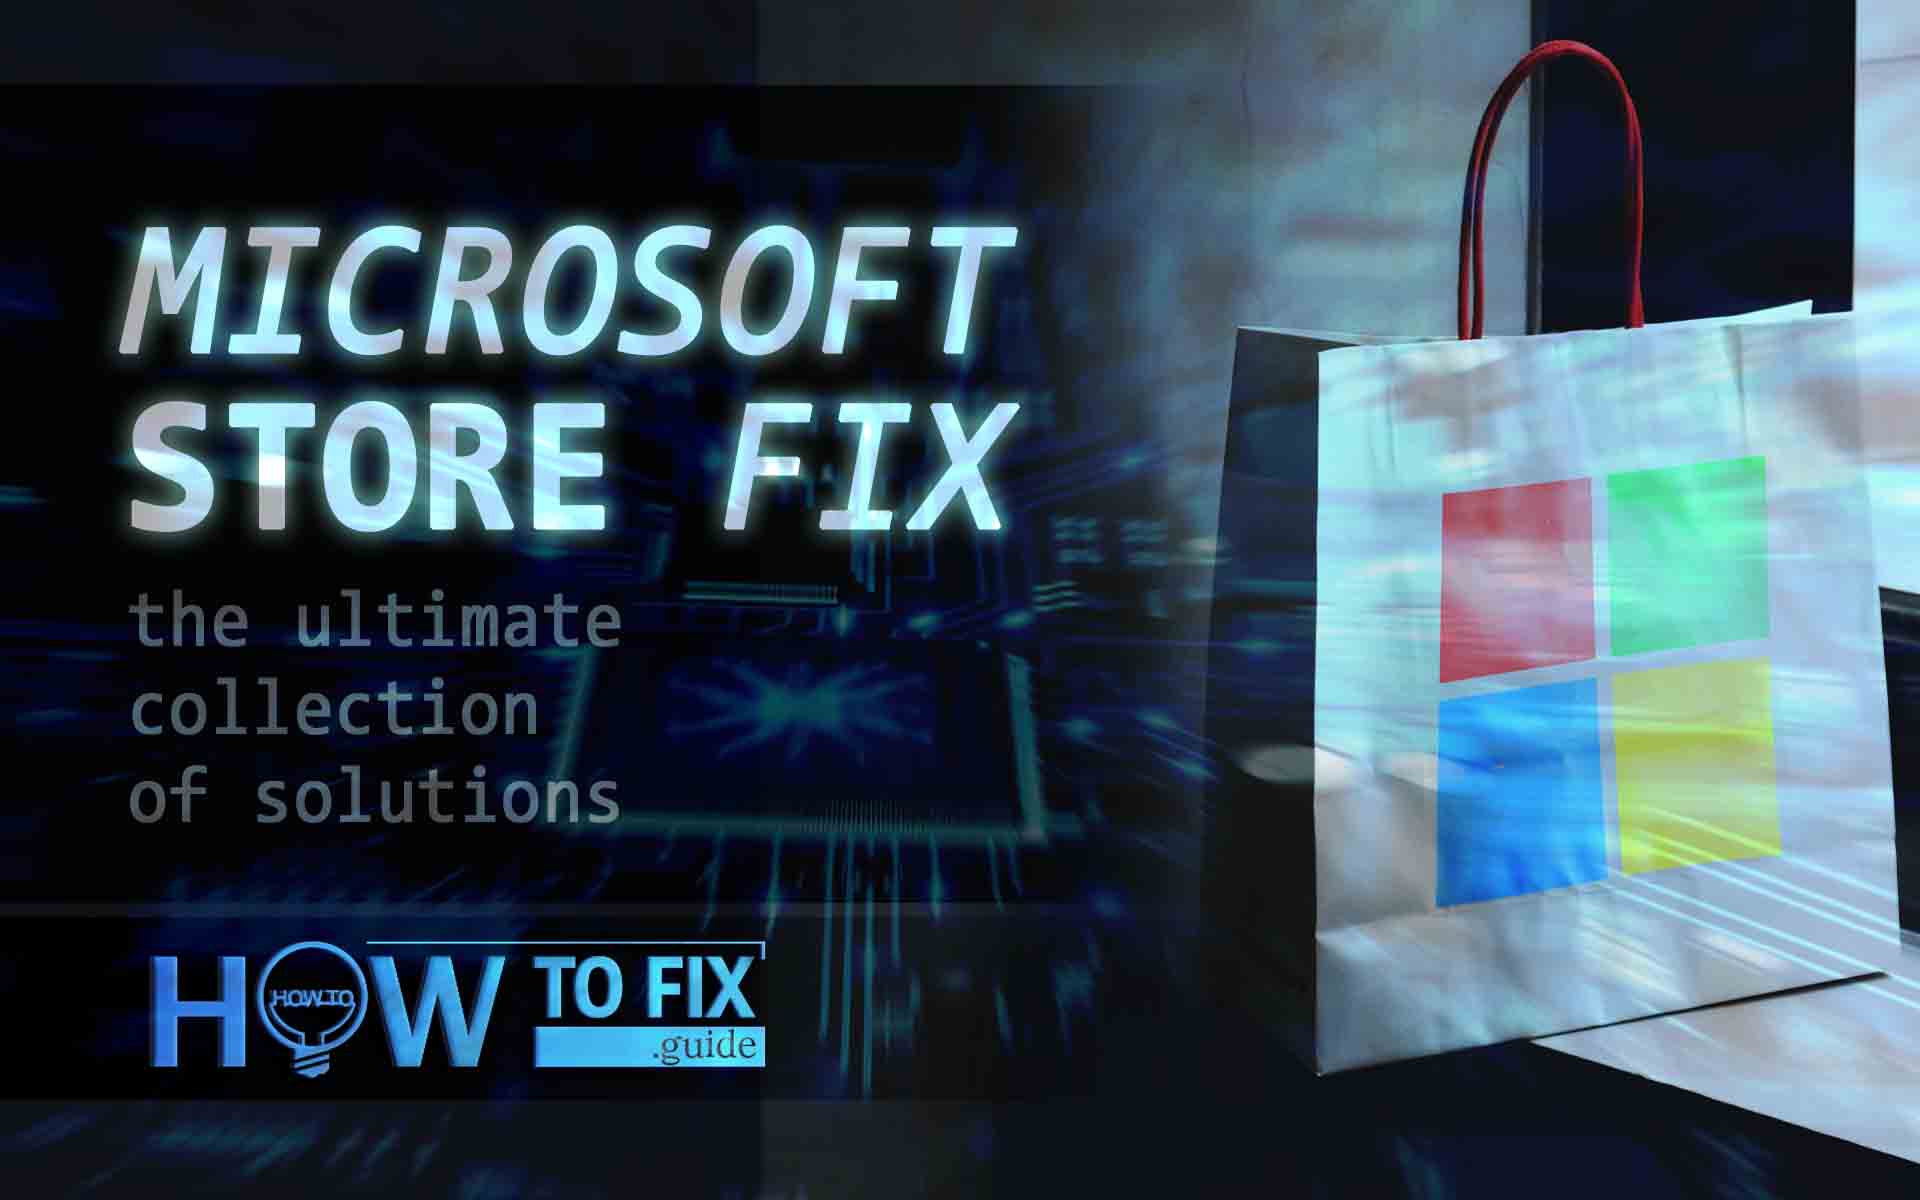 Microsoft Store Fix: the Ultimate Collection of Solutions